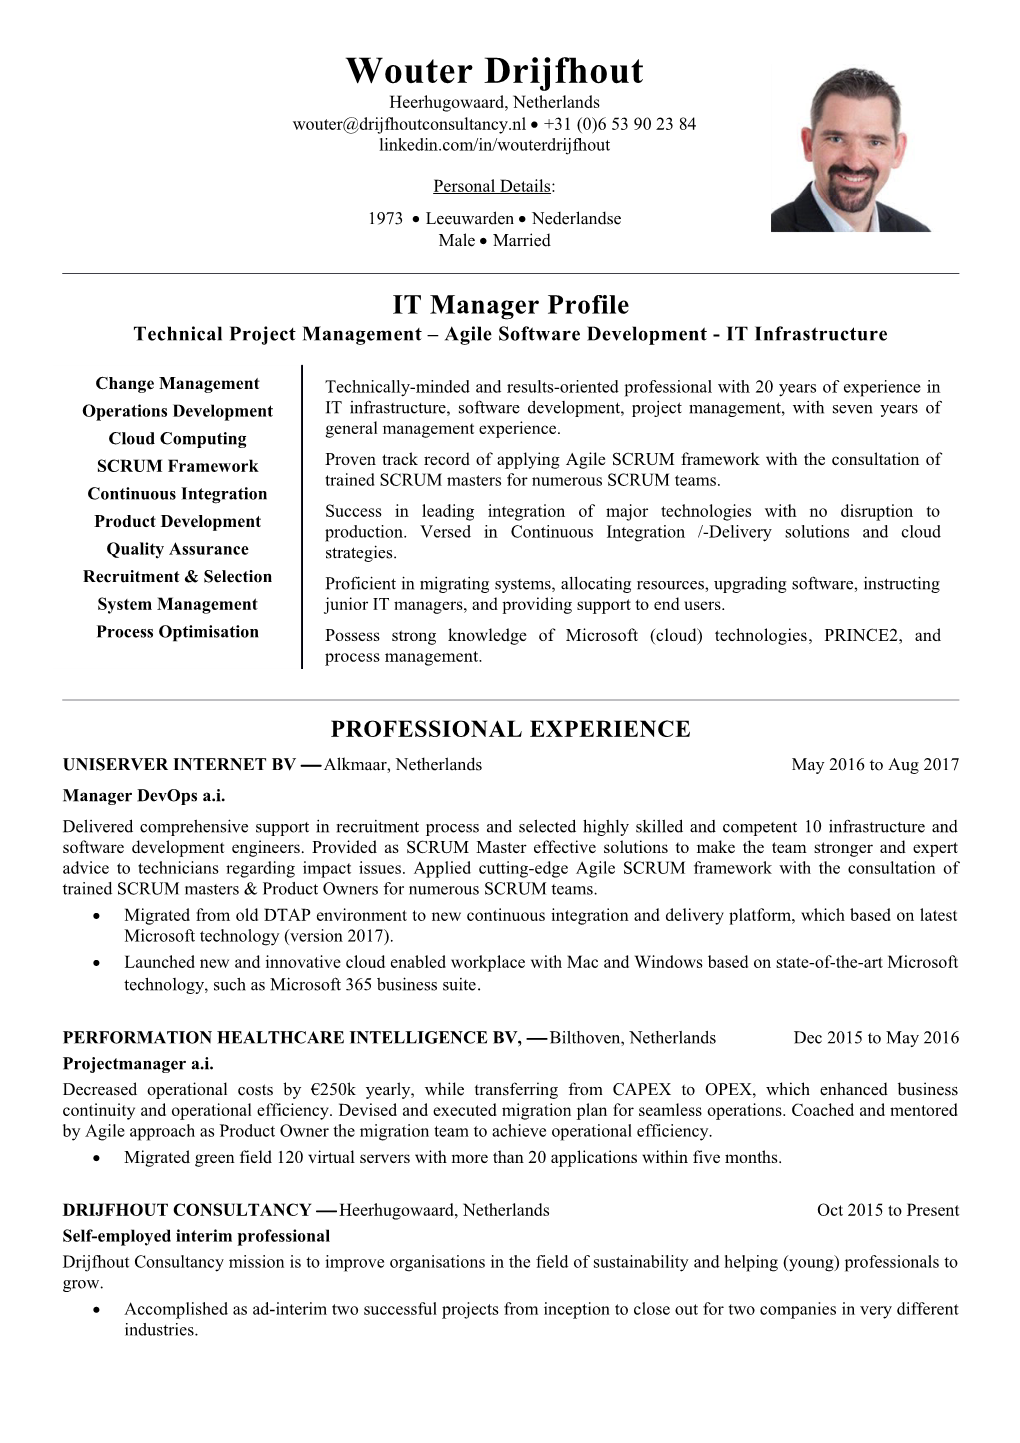 Wouter Drijfhout's Standard Resume